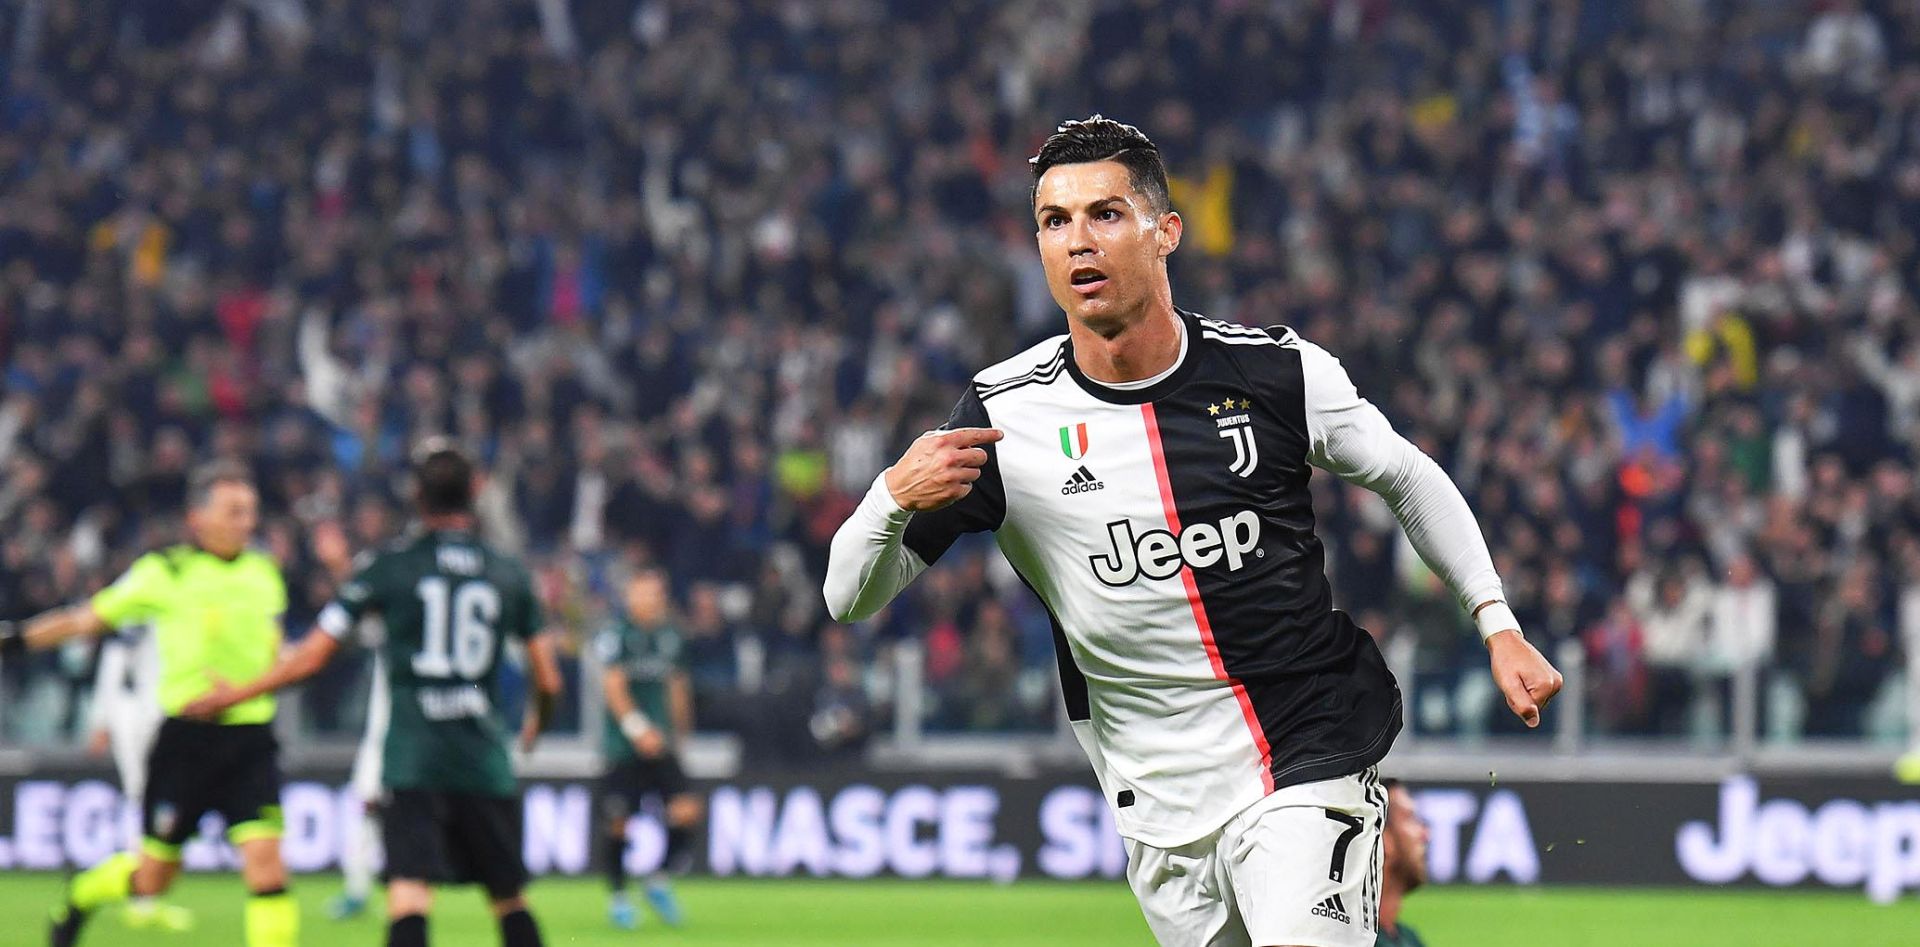 epa07934821 Juventus' Cristiano Ronaldo celebrates after scoring the 1-0 lead during the Italian Serie A soccer match between Juventus FC and Bologna FC in Turin, Italy, 19 October 2019.  EPA/ALESSANDRO DI MARCO